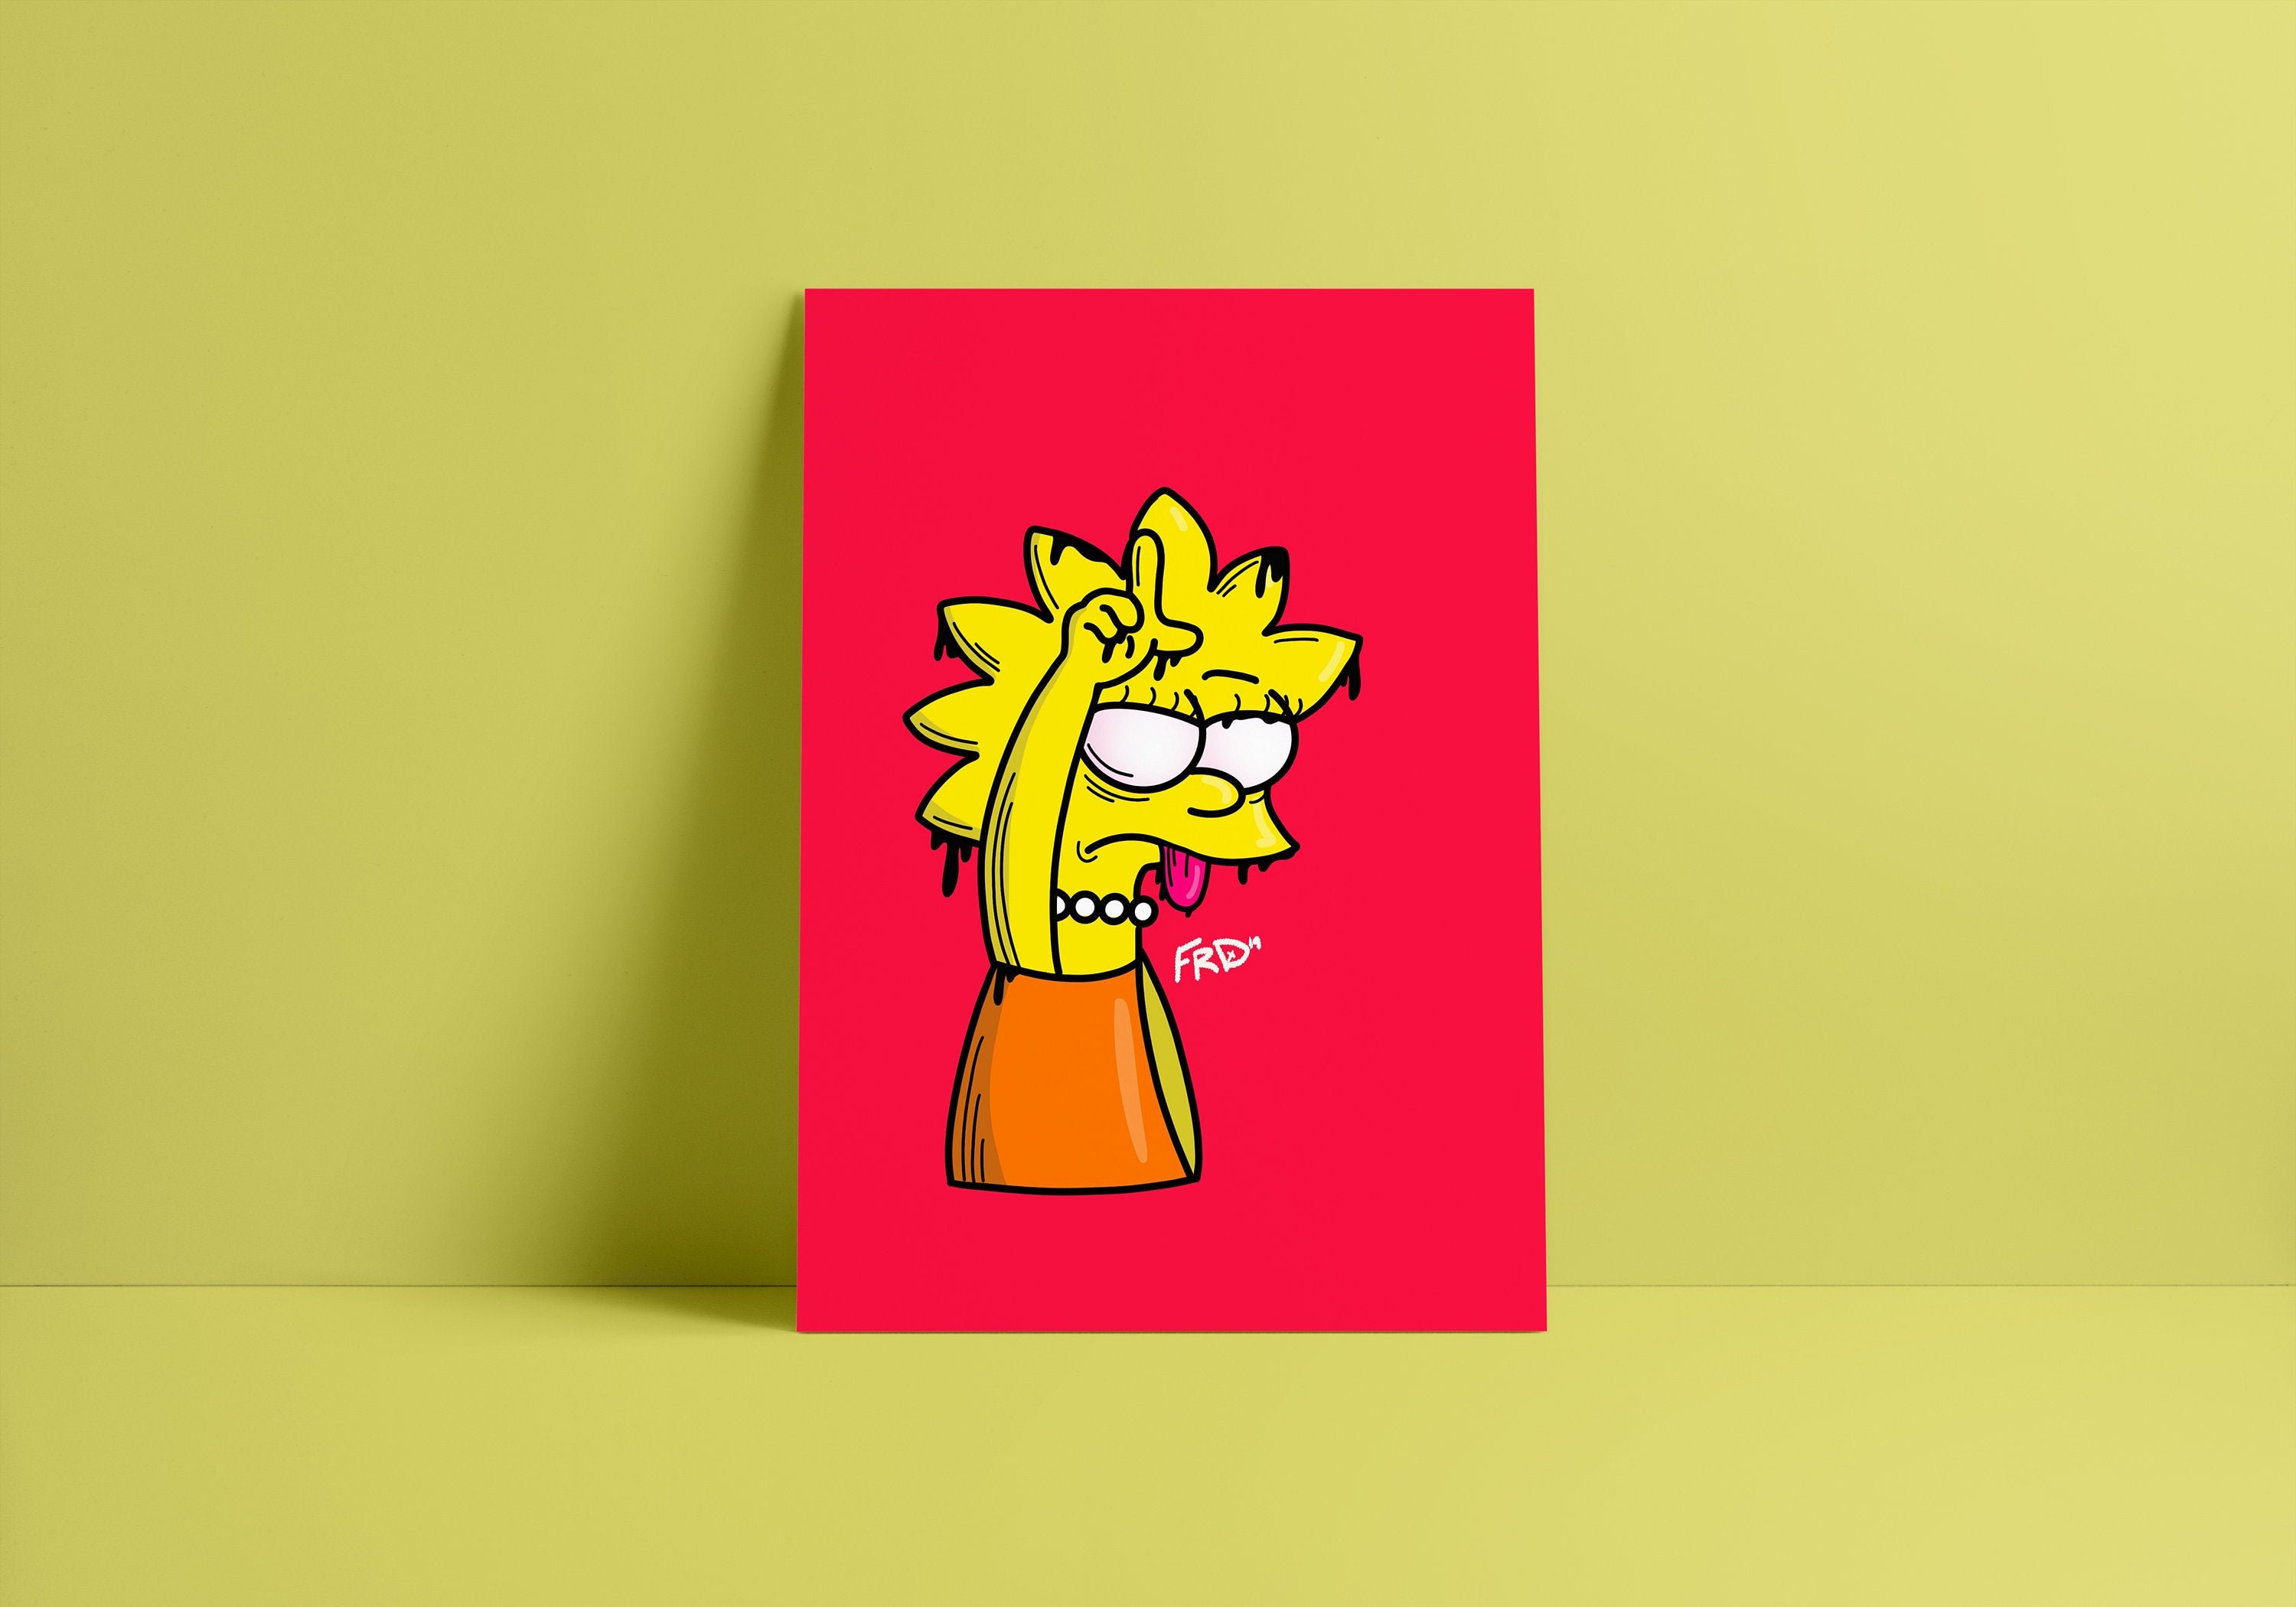 crystal guerra recommends Free Lisa Simpson Porn